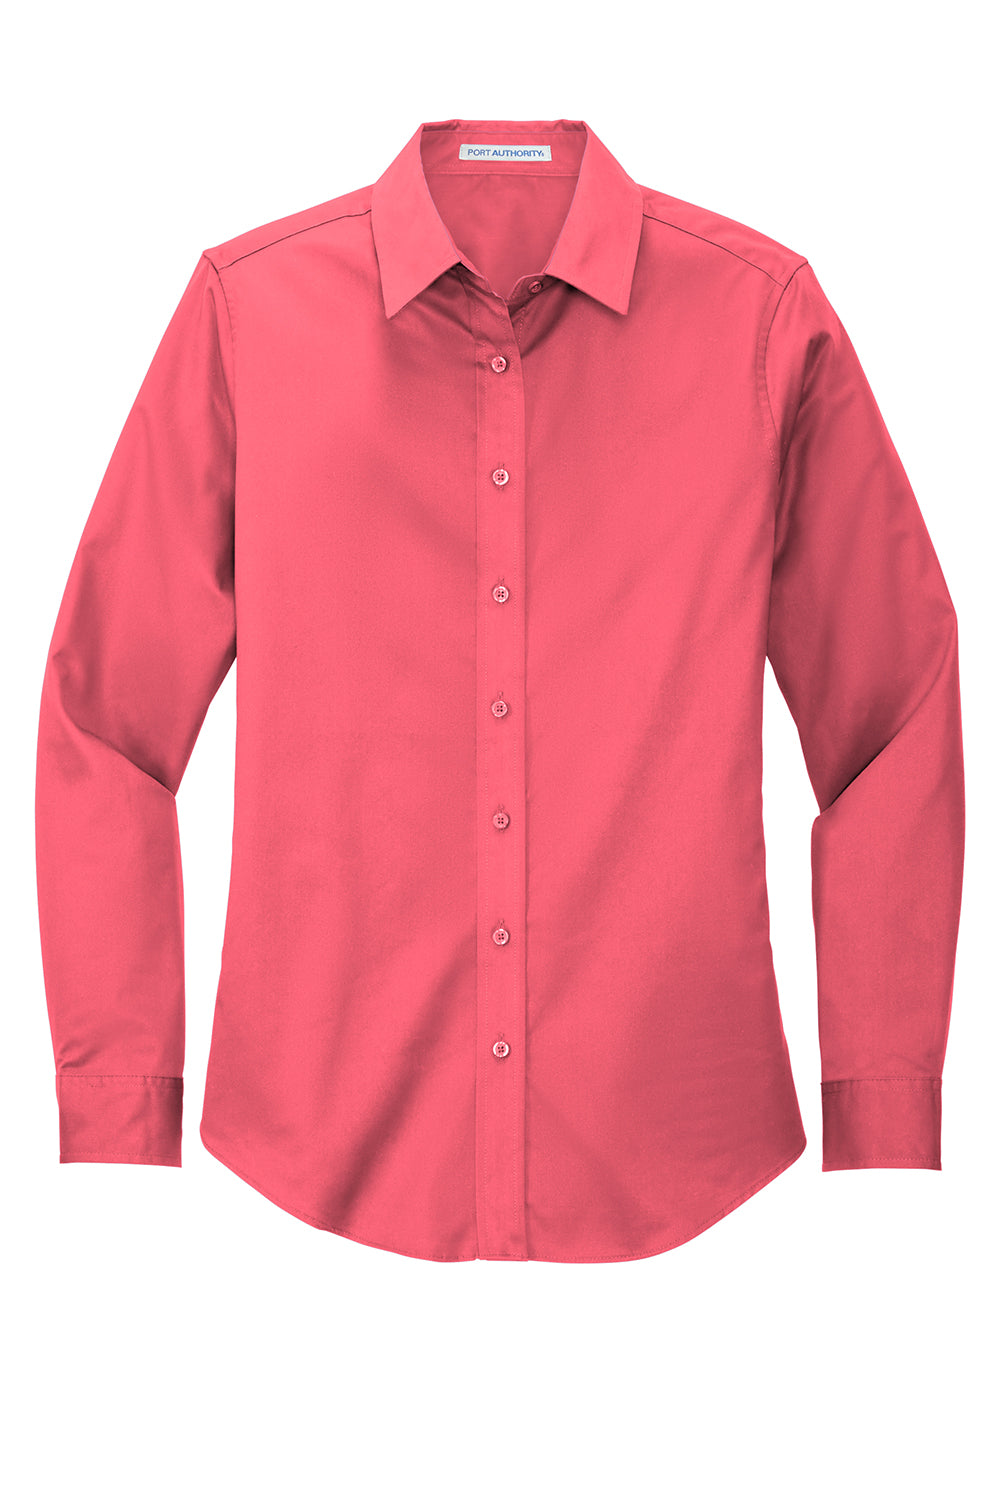 Port Authority L608 Womens Easy Care Wrinkle Resistant Long Sleeve Button Down Shirt Hibiscus Pink Flat Front